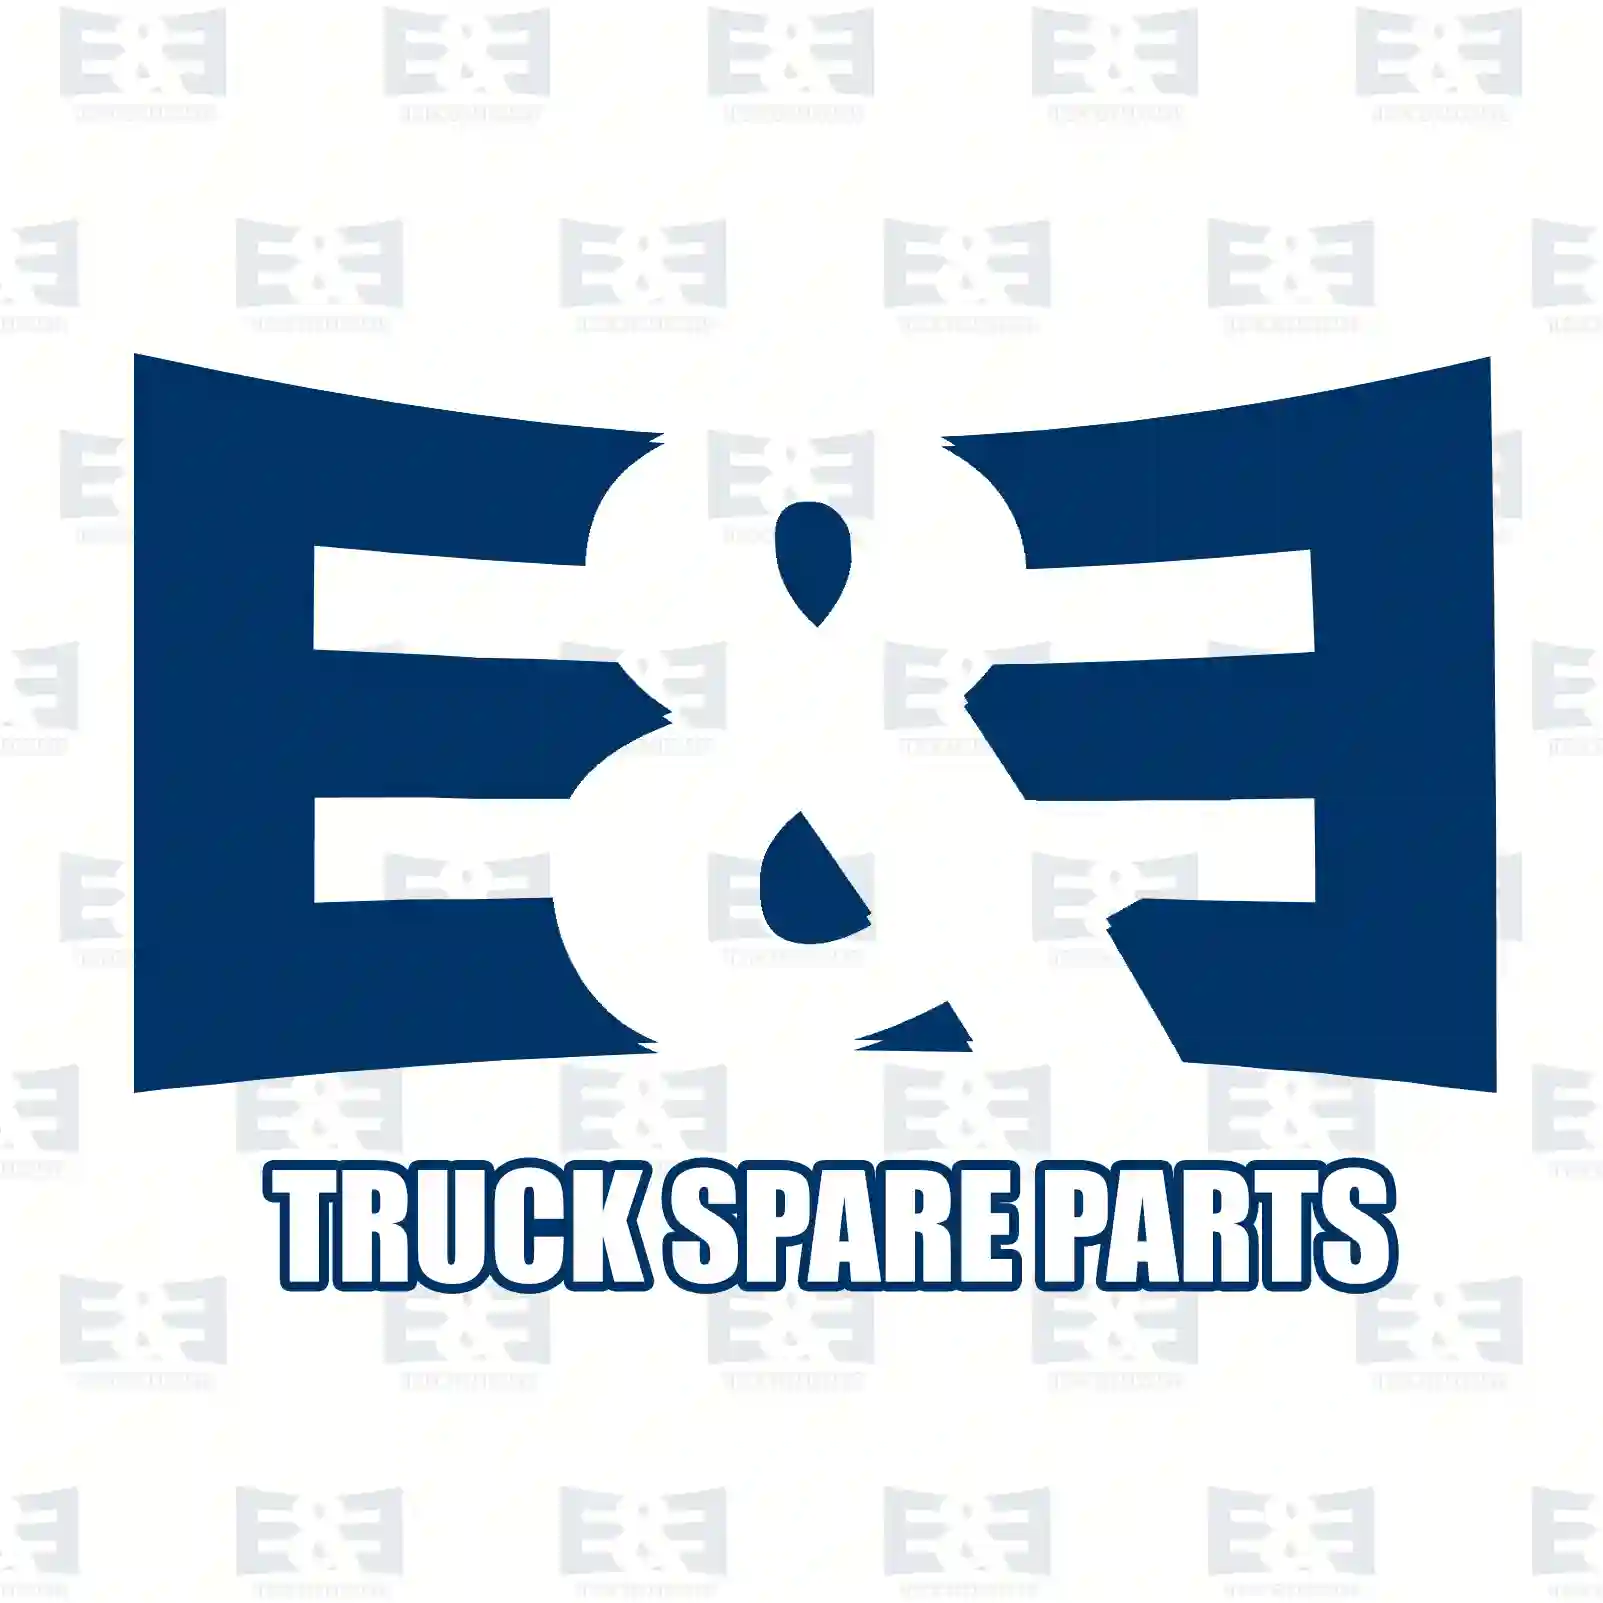  Gear, complete with bearing || E&E Truck Spare Parts | Truck Spare Parts, Auotomotive Spare Parts